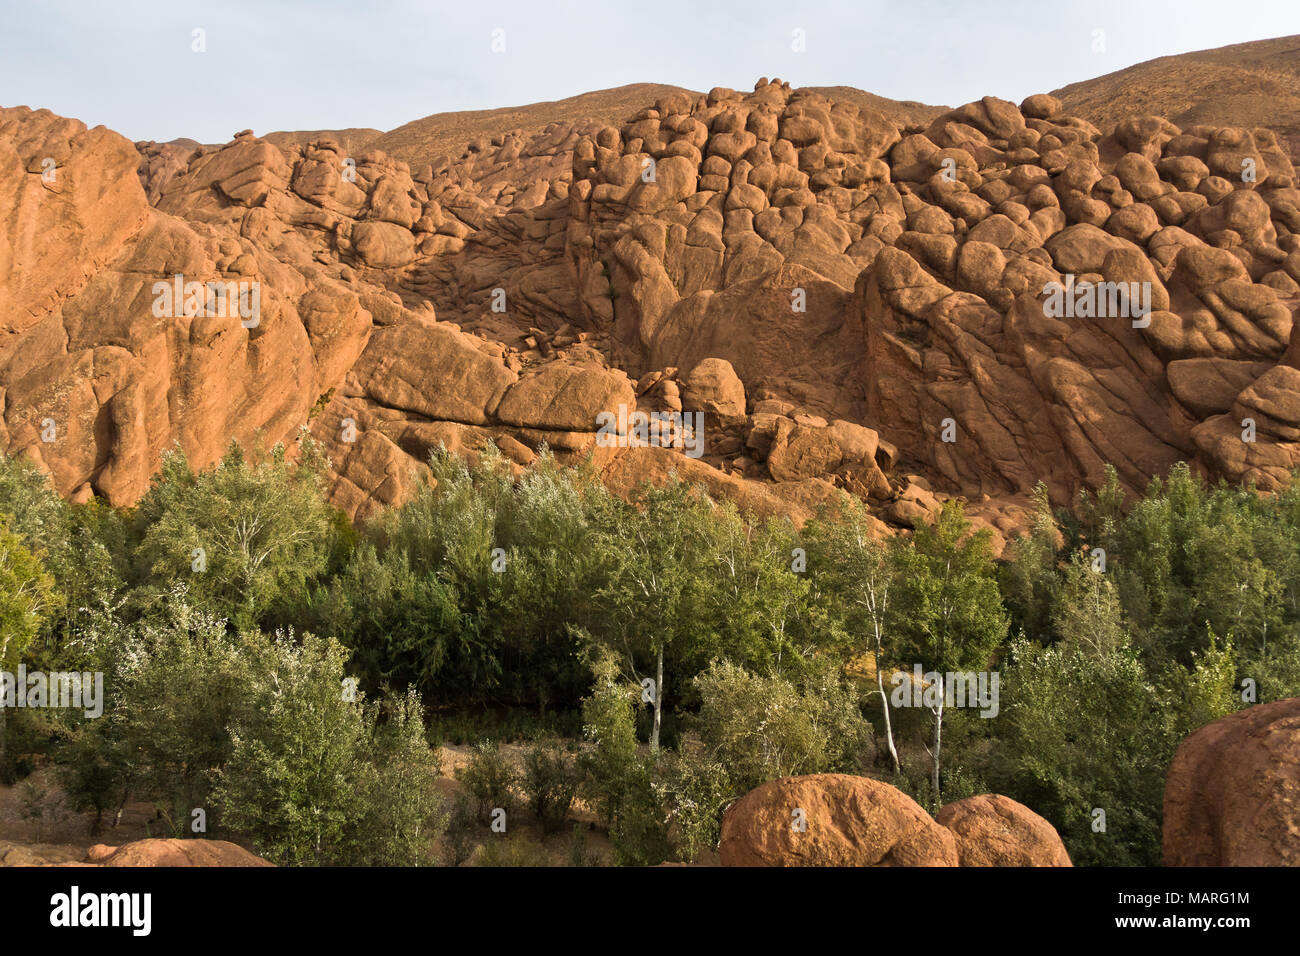 Rocky landscape at the top of Dadas Gorge in Morocco Stock Photo